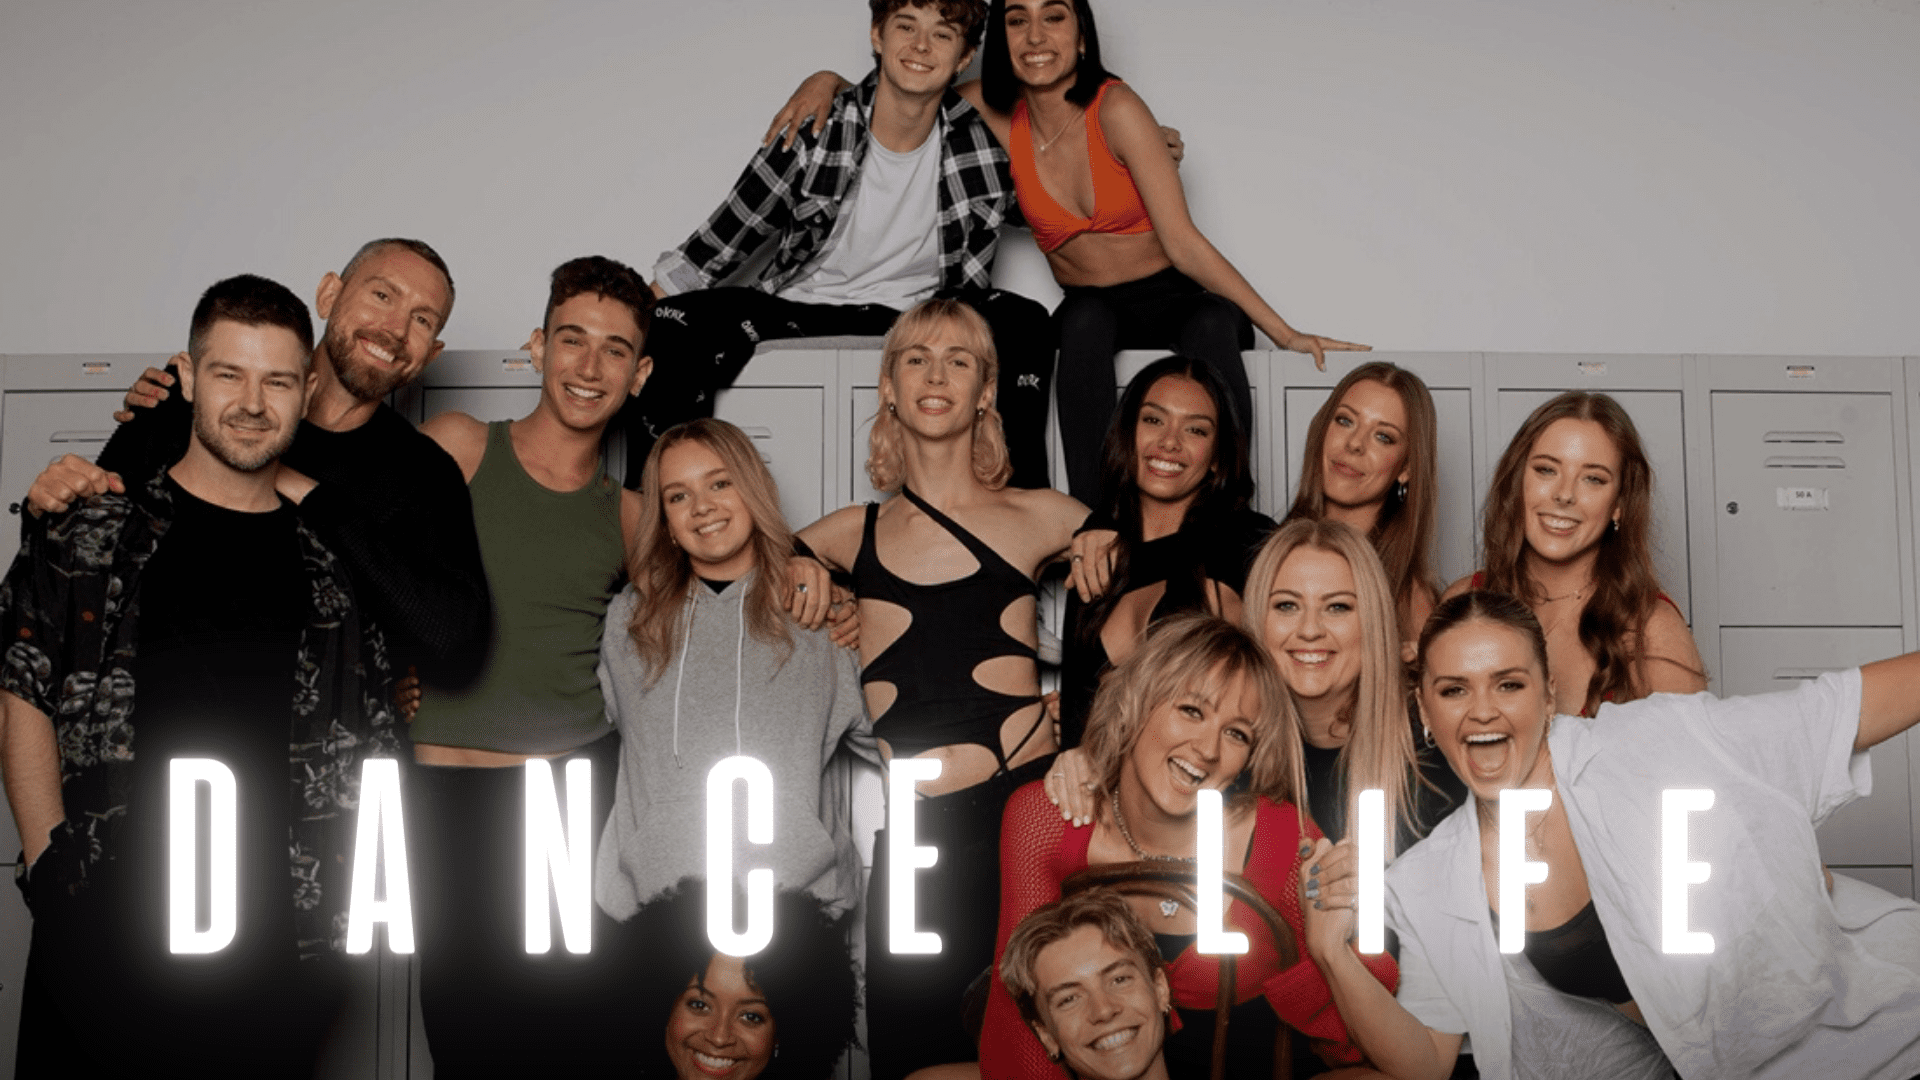 Dance life amazon prime: Release Date, Cast, Trailer, Plot, where to watch?